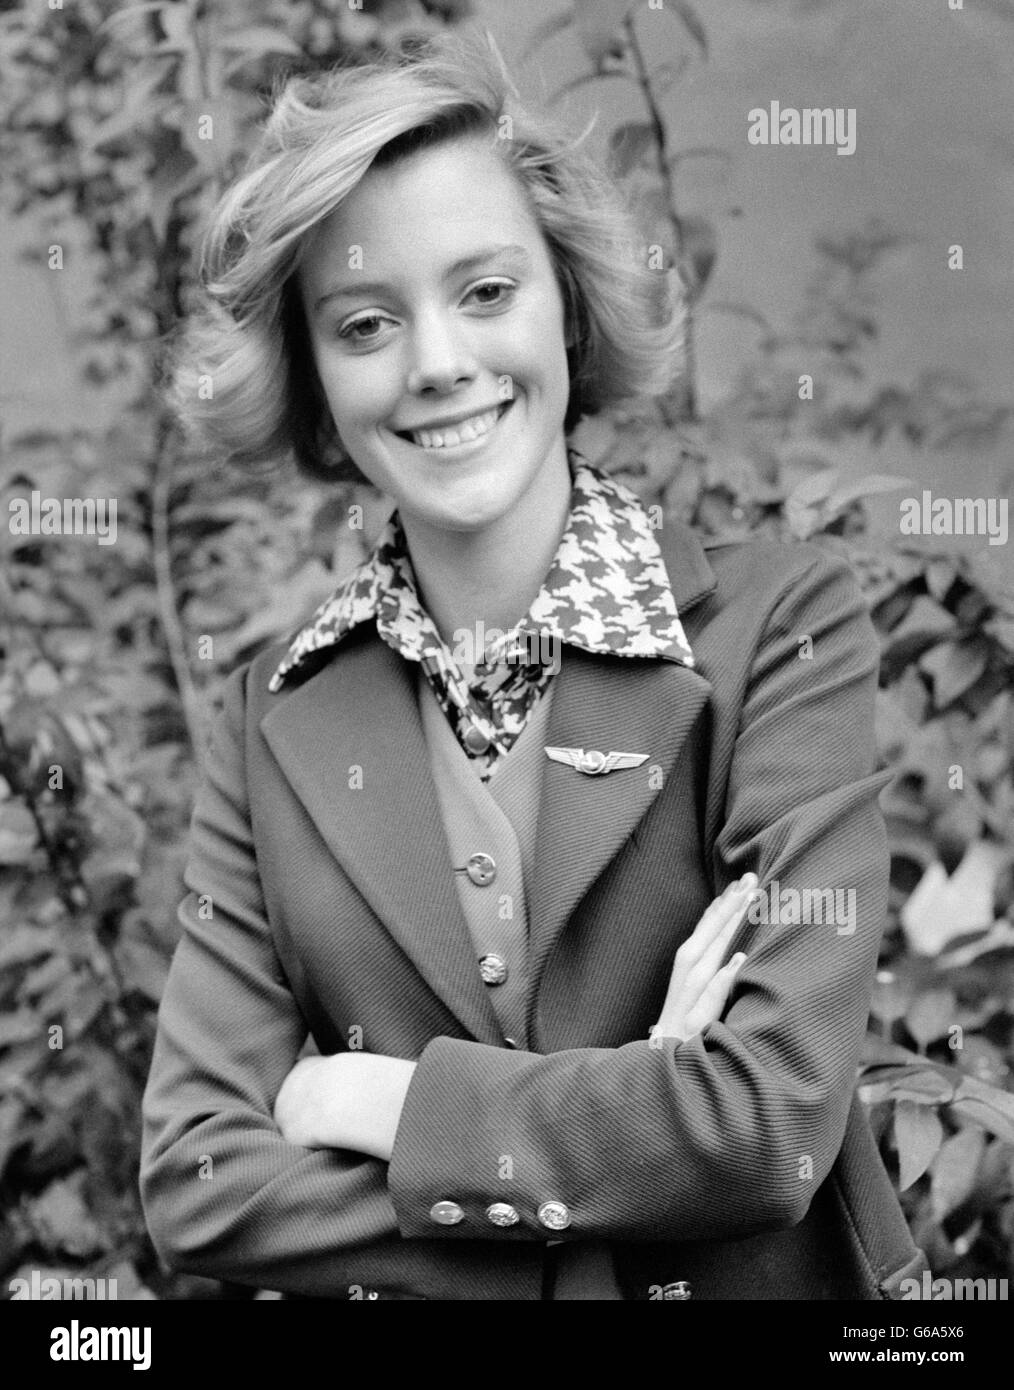 1970s PORTRAIT SMILING AIRLINE FLIGHT ATTENDANT WEARING WING PIN ON LAPEL STEWARDESS LOOKING AT CAMERA Stock Photo